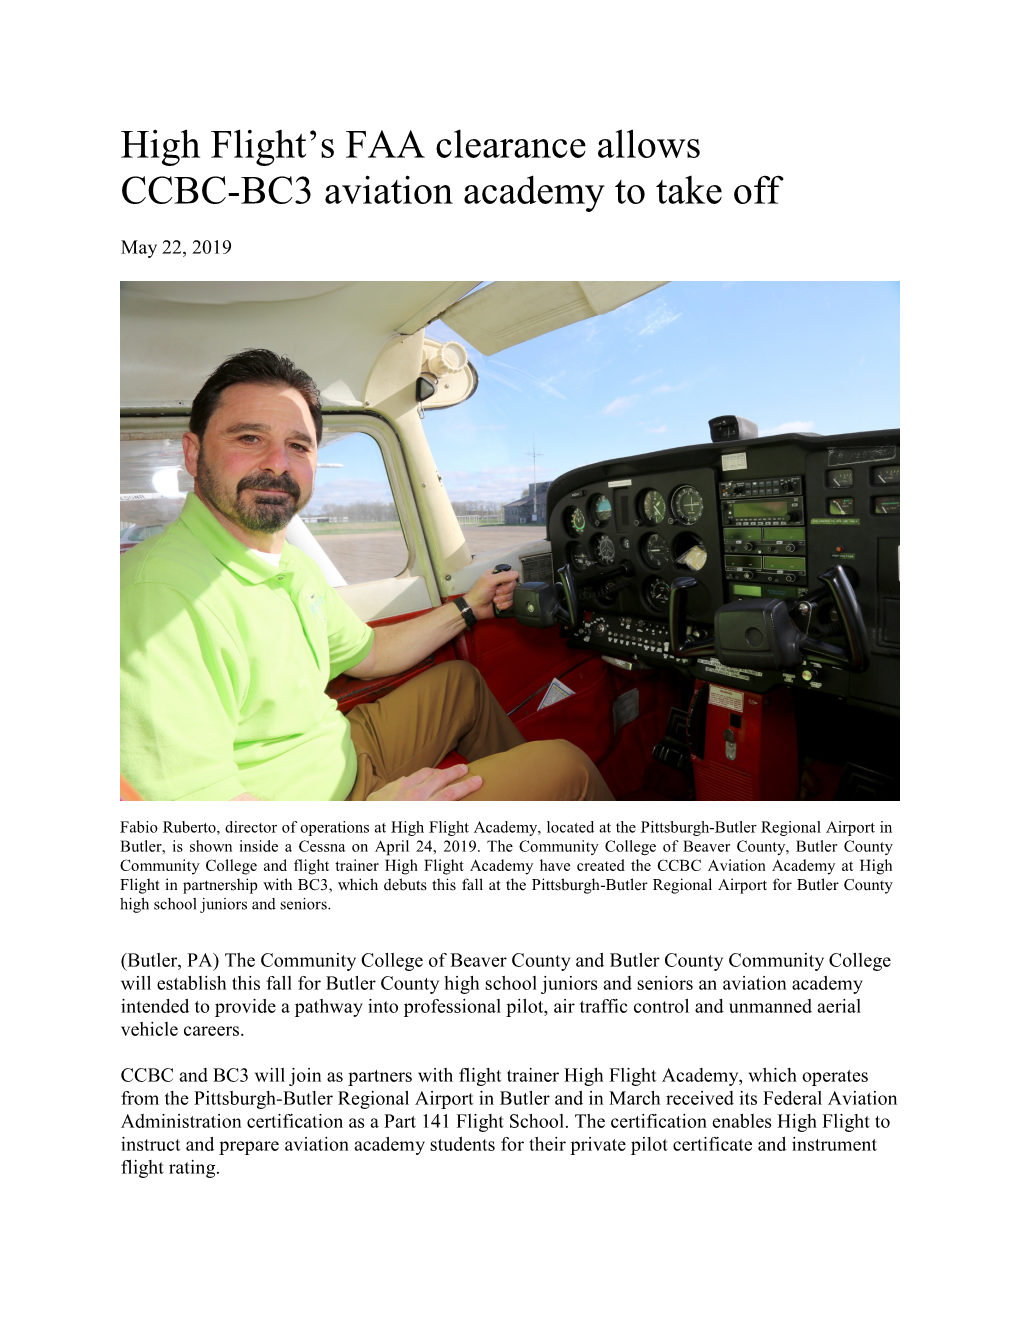 High Flight's FAA Clearance Allows CCBC-BC3 Aviation Academy to Take